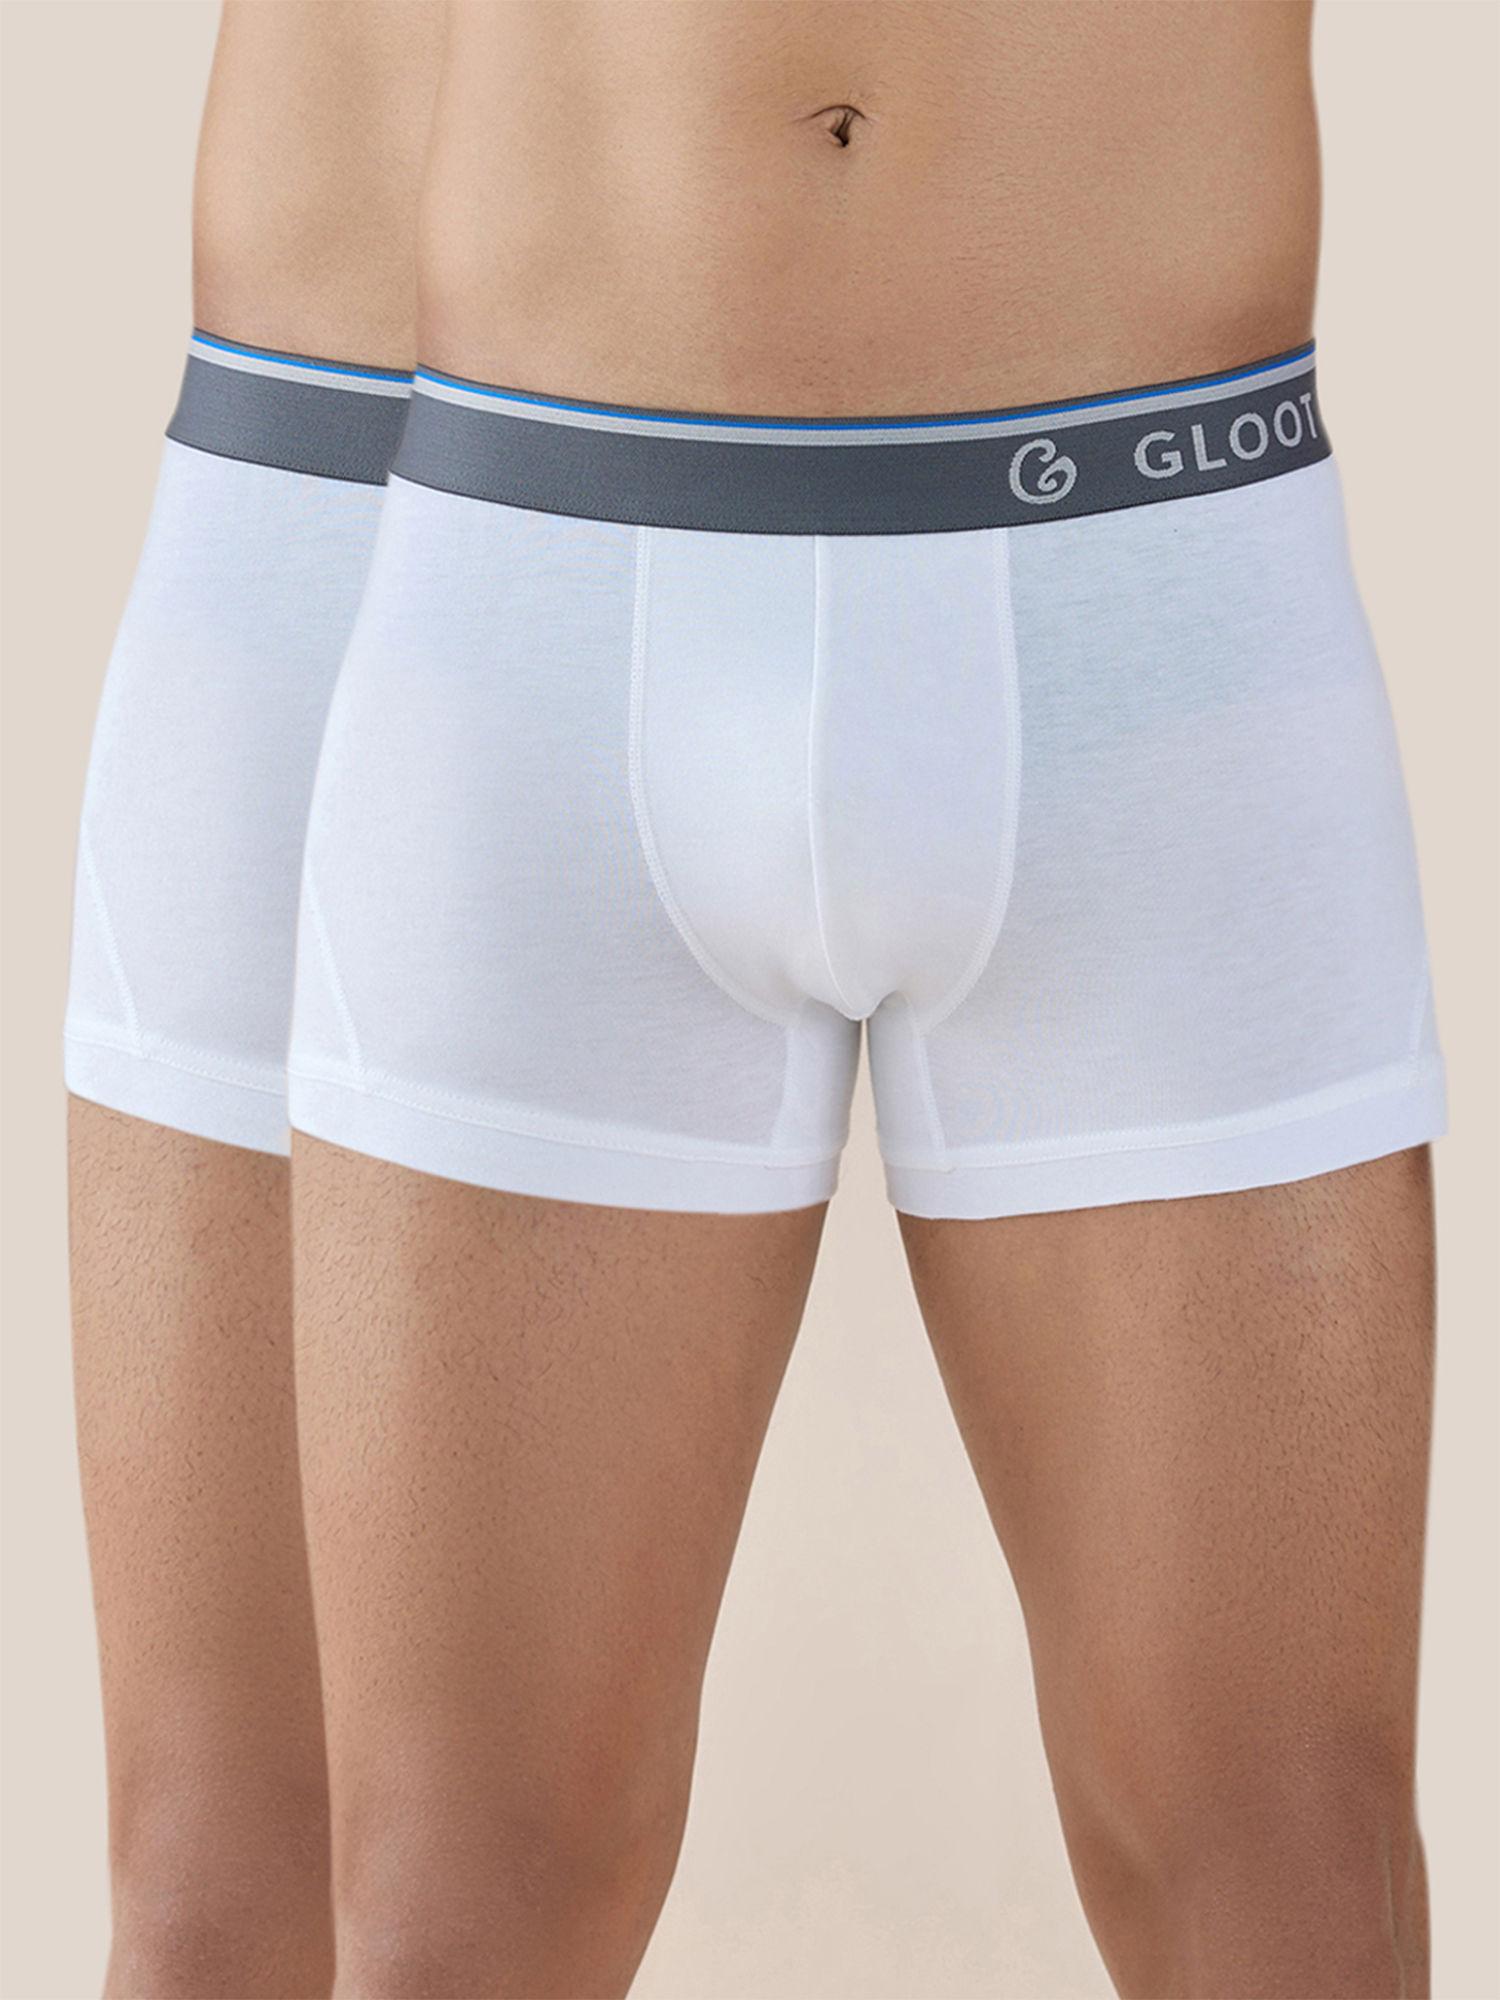 butter blend cotton trunk with no itch elastic and anti odour gli019 multicolor (pack of 2)